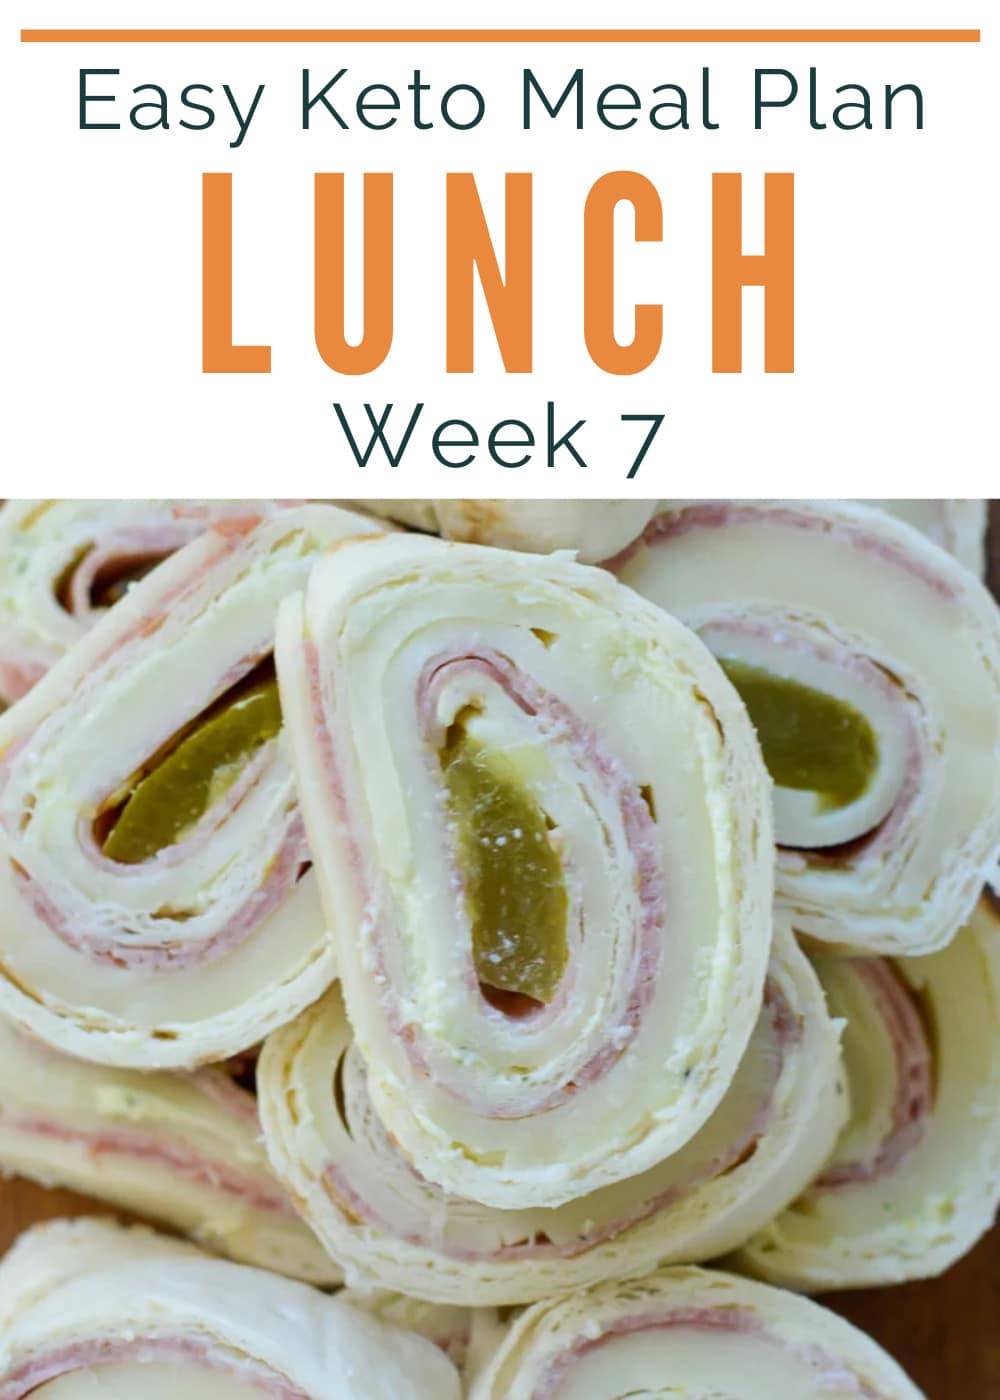 These Keto Lunch Ideas make sticking to keto easier! Enjoy 5 low-carb lunches plus a bonus snack recipe to keep you full and satisfied. Printable grocery list and meal prep tips included.